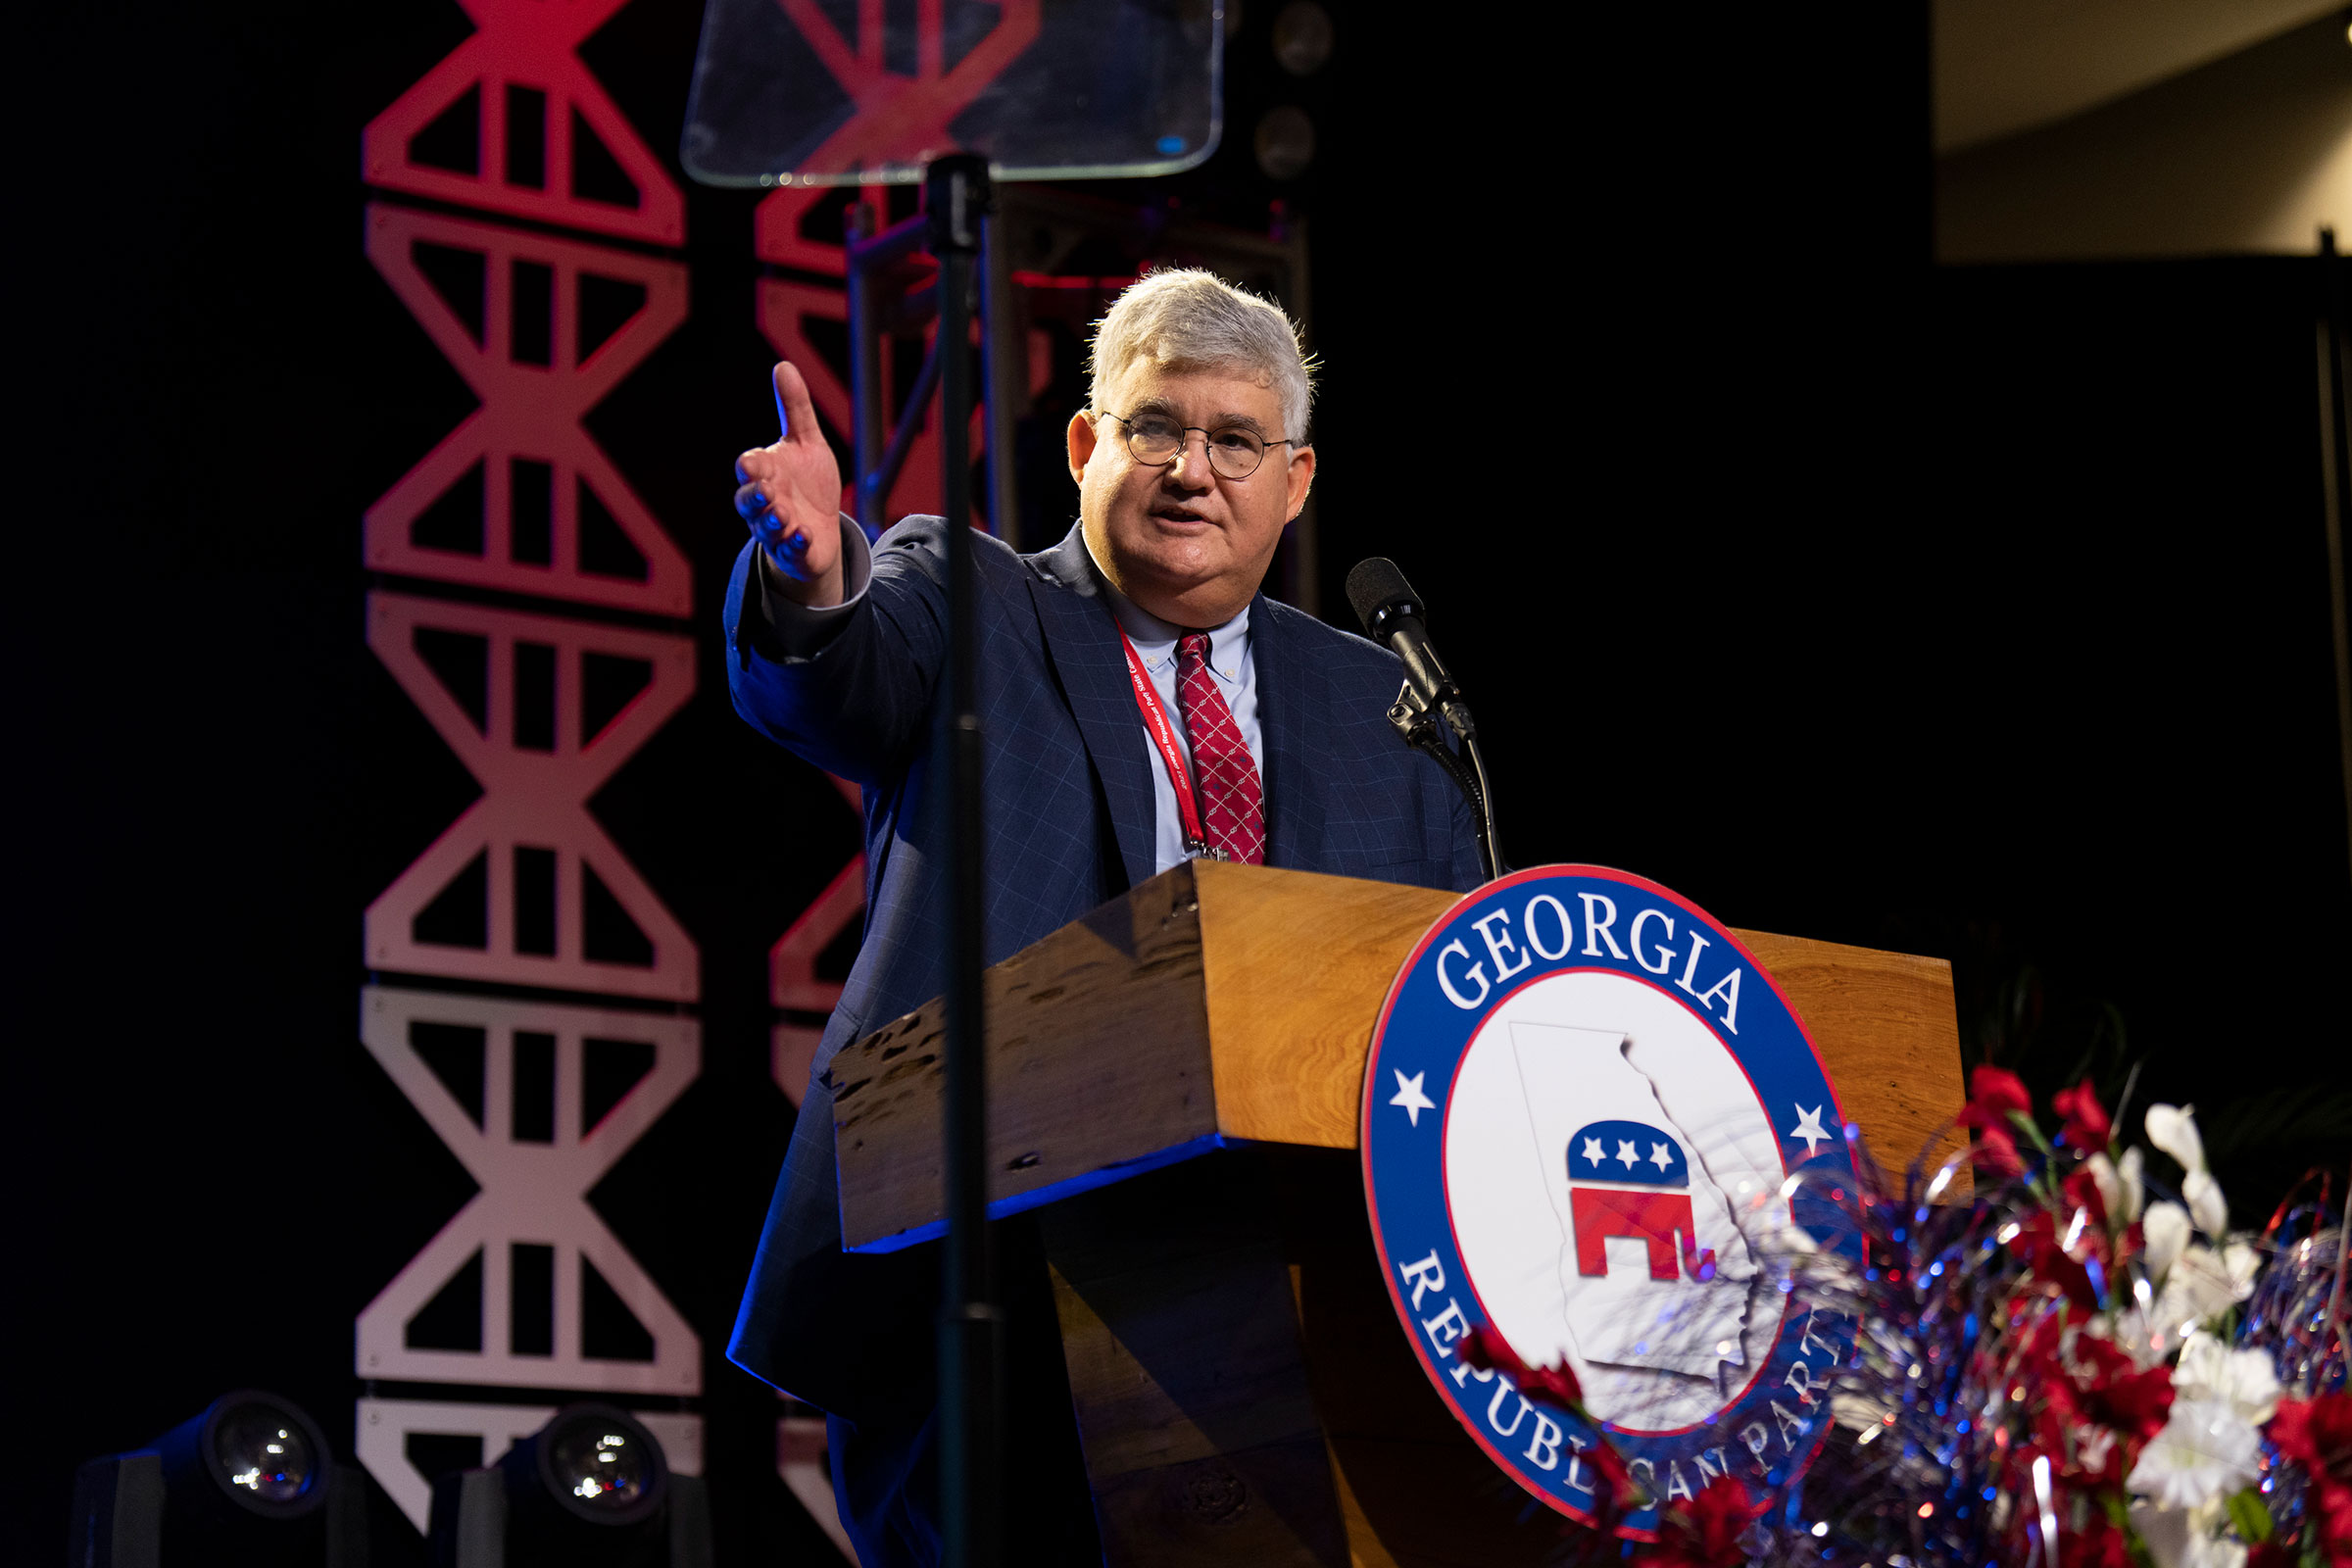 Georgia Republican Party's state convention